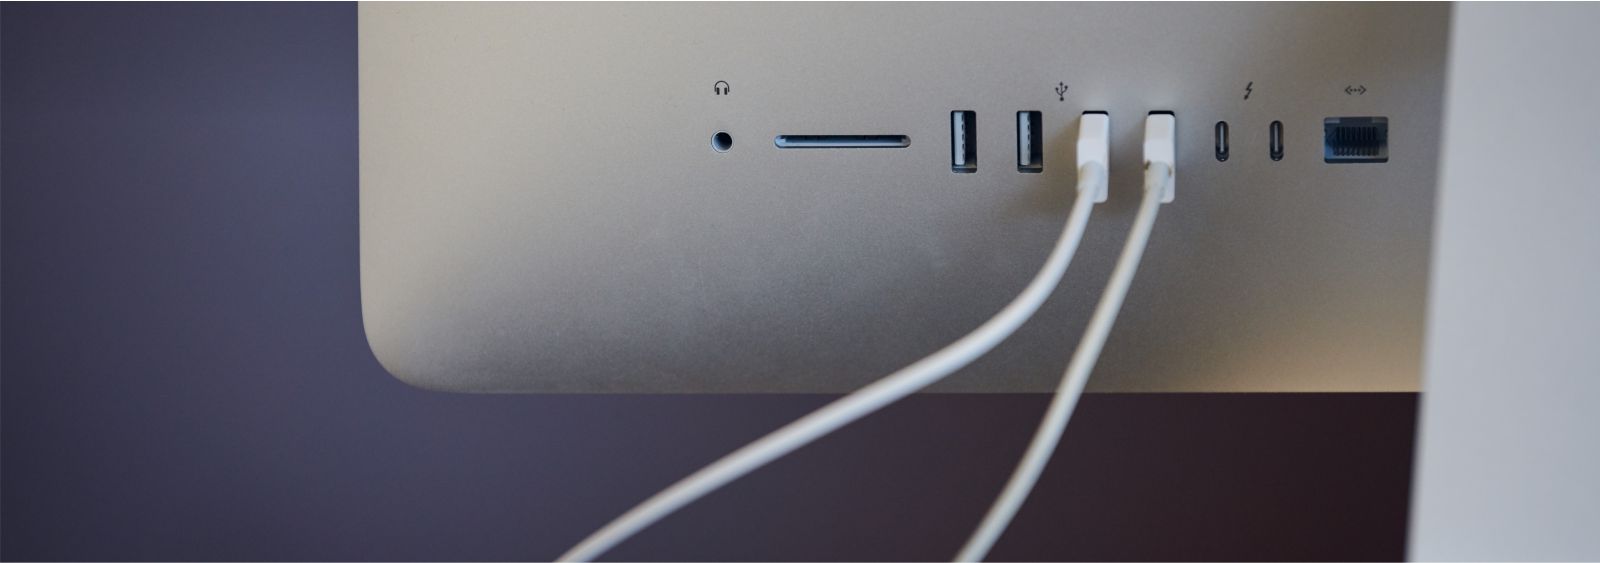 back of Apple Studio Display with white USB cables plugged in